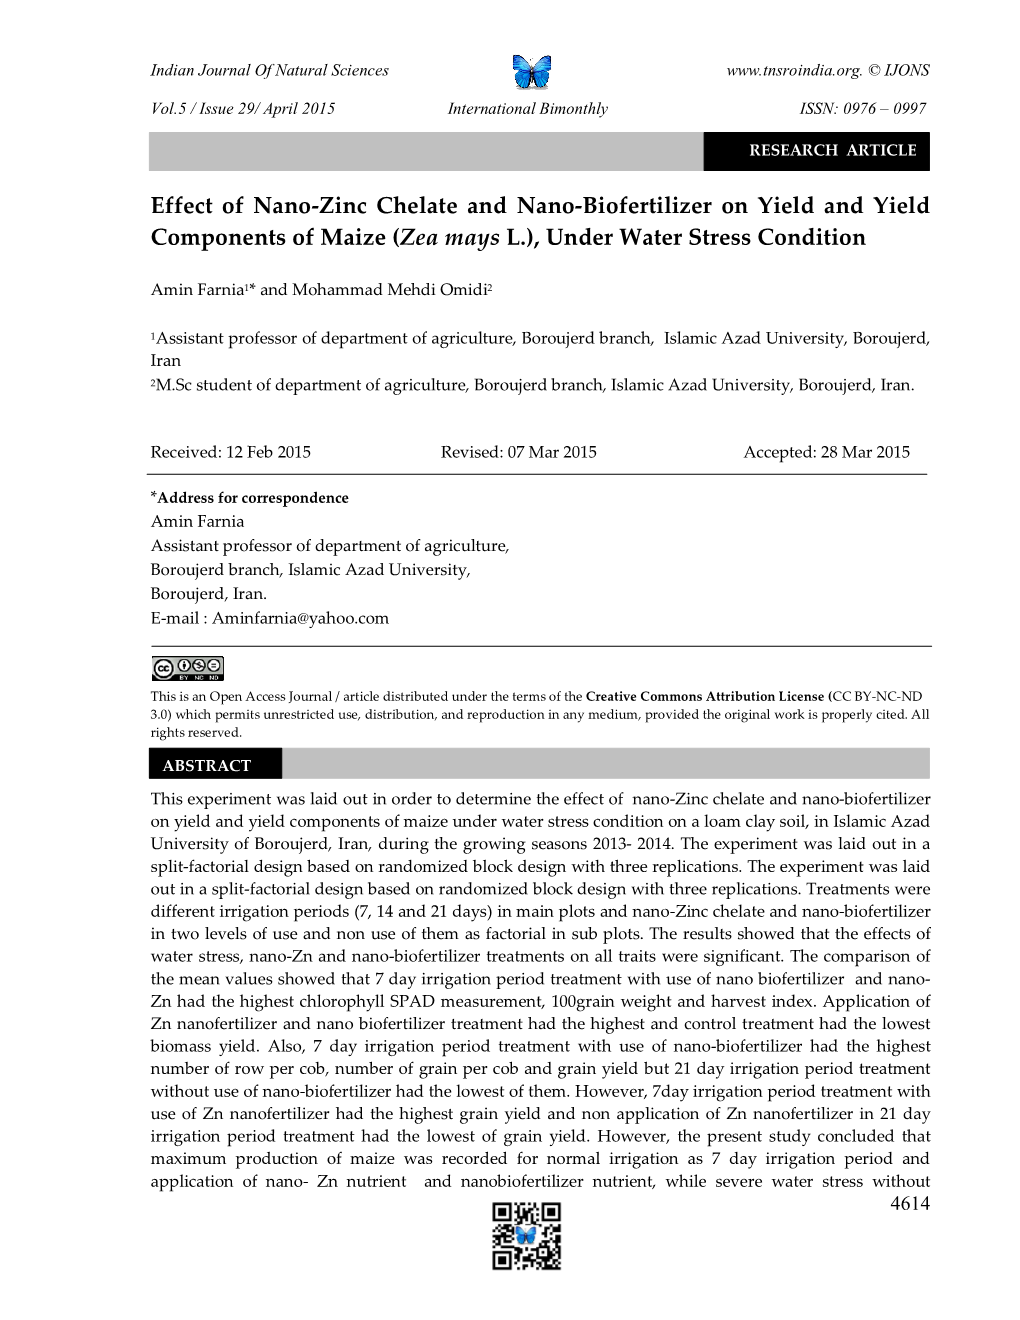 Effect of Nano-Zinc Chelate and Nano-Biofertilizer on Yield and Yield Components of Maize (Zea Mays L.), Under Water Stress Condition